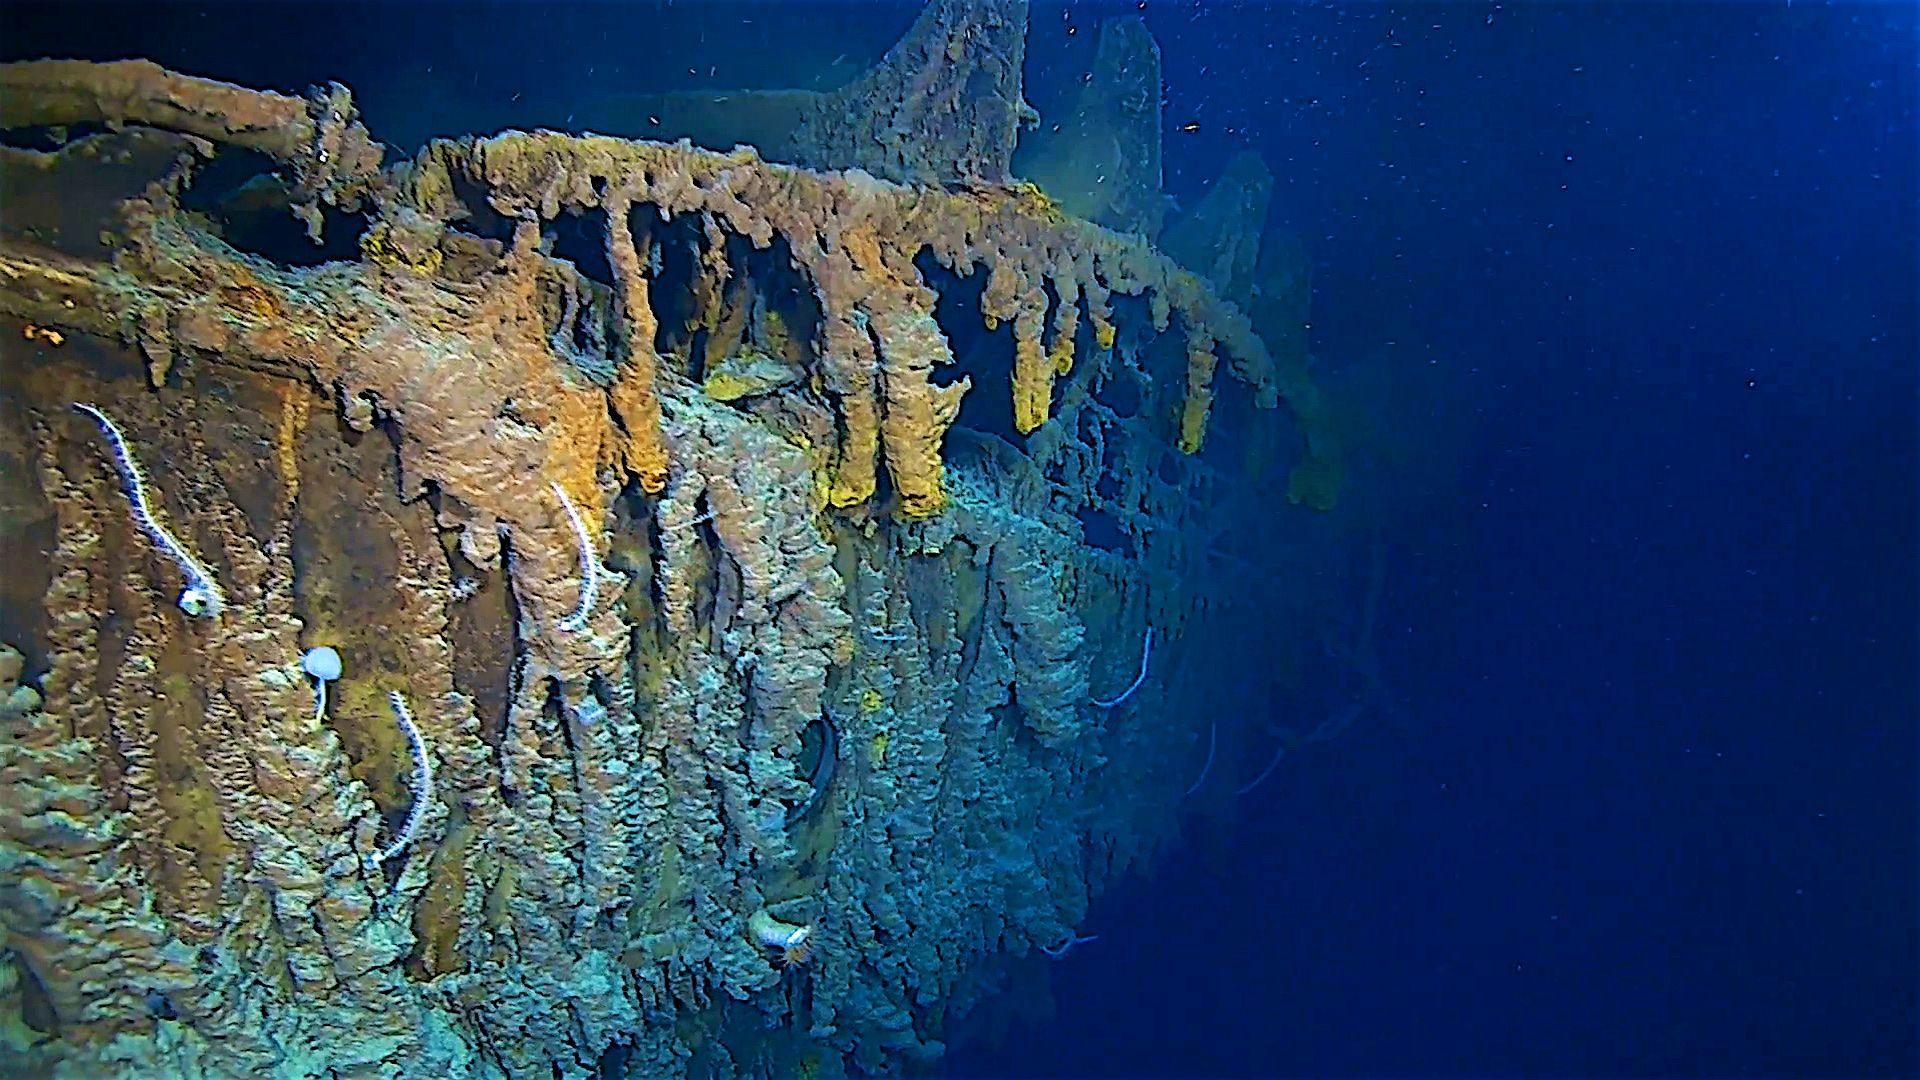 Salt Corrosion And Metal-eating Bacteria Are Causing - Titanic 2019 - HD Wallpaper 